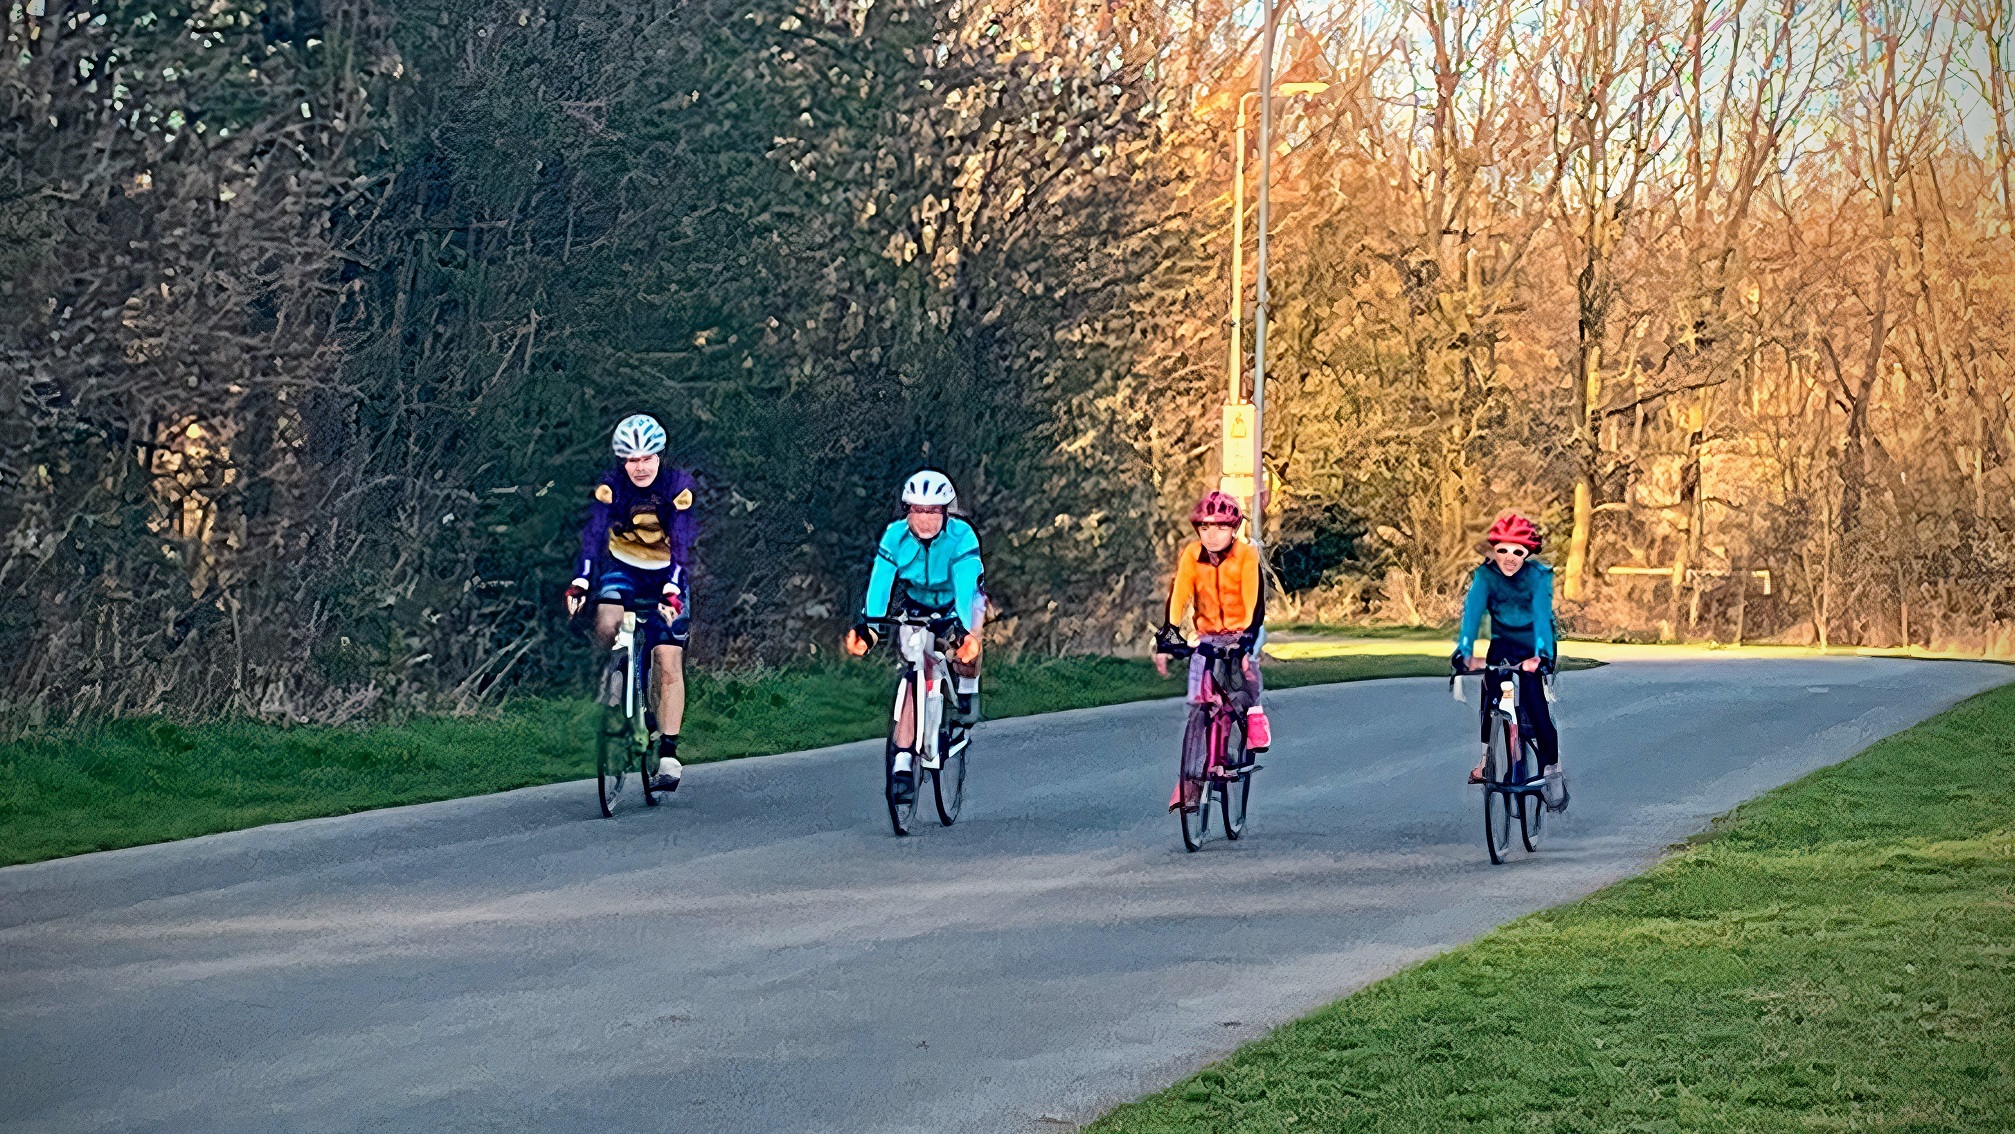 Four young ladies cycling together in support of each other.